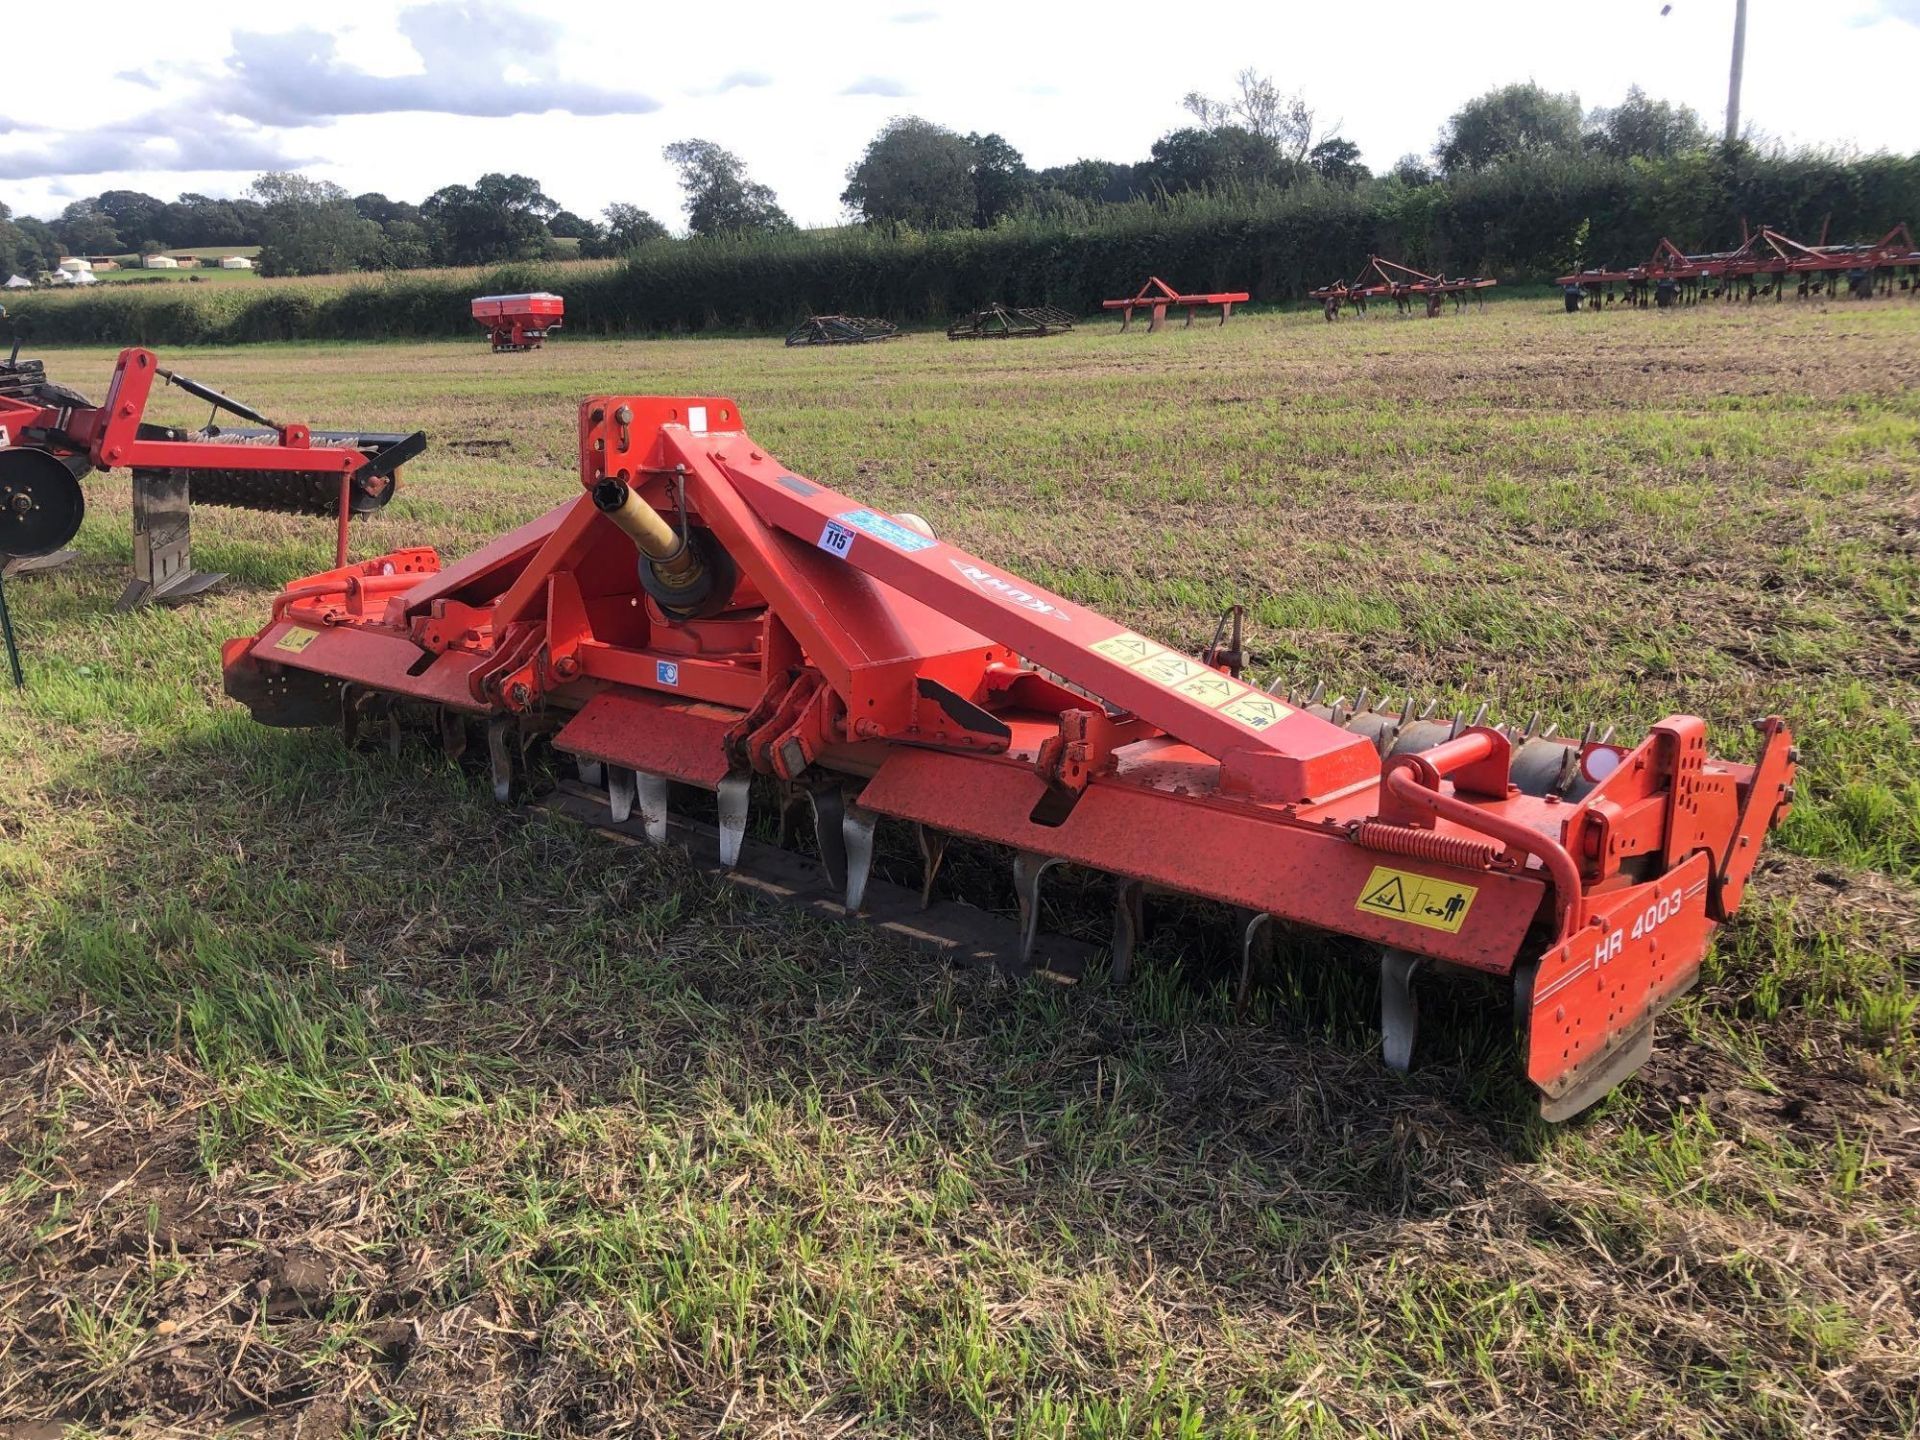 2001 Kuhn HR4003D power harrow with rear maxi packer, quick release tines, linkage mounted. Serial N